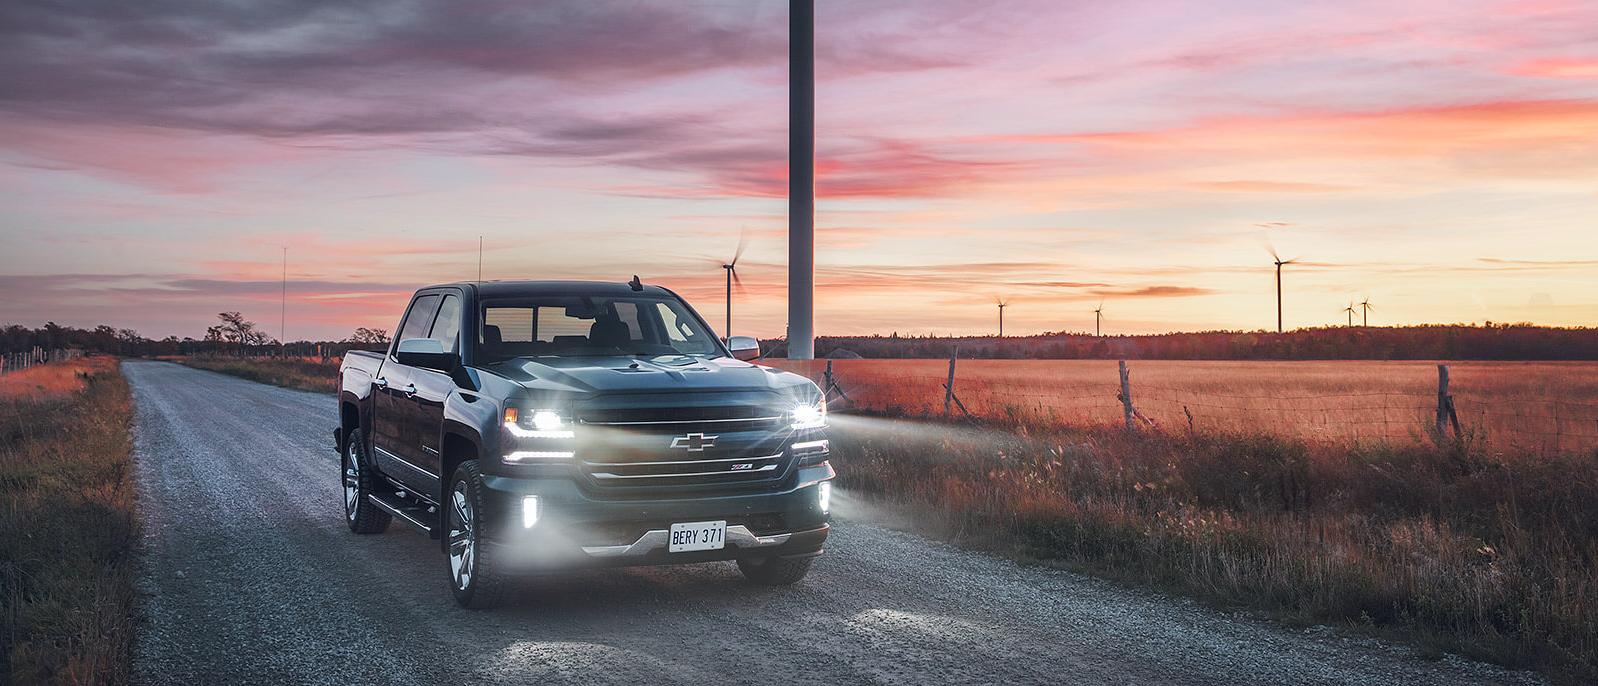 A 2018 Chevy Silverado 1500 driving down a country road at sunset.